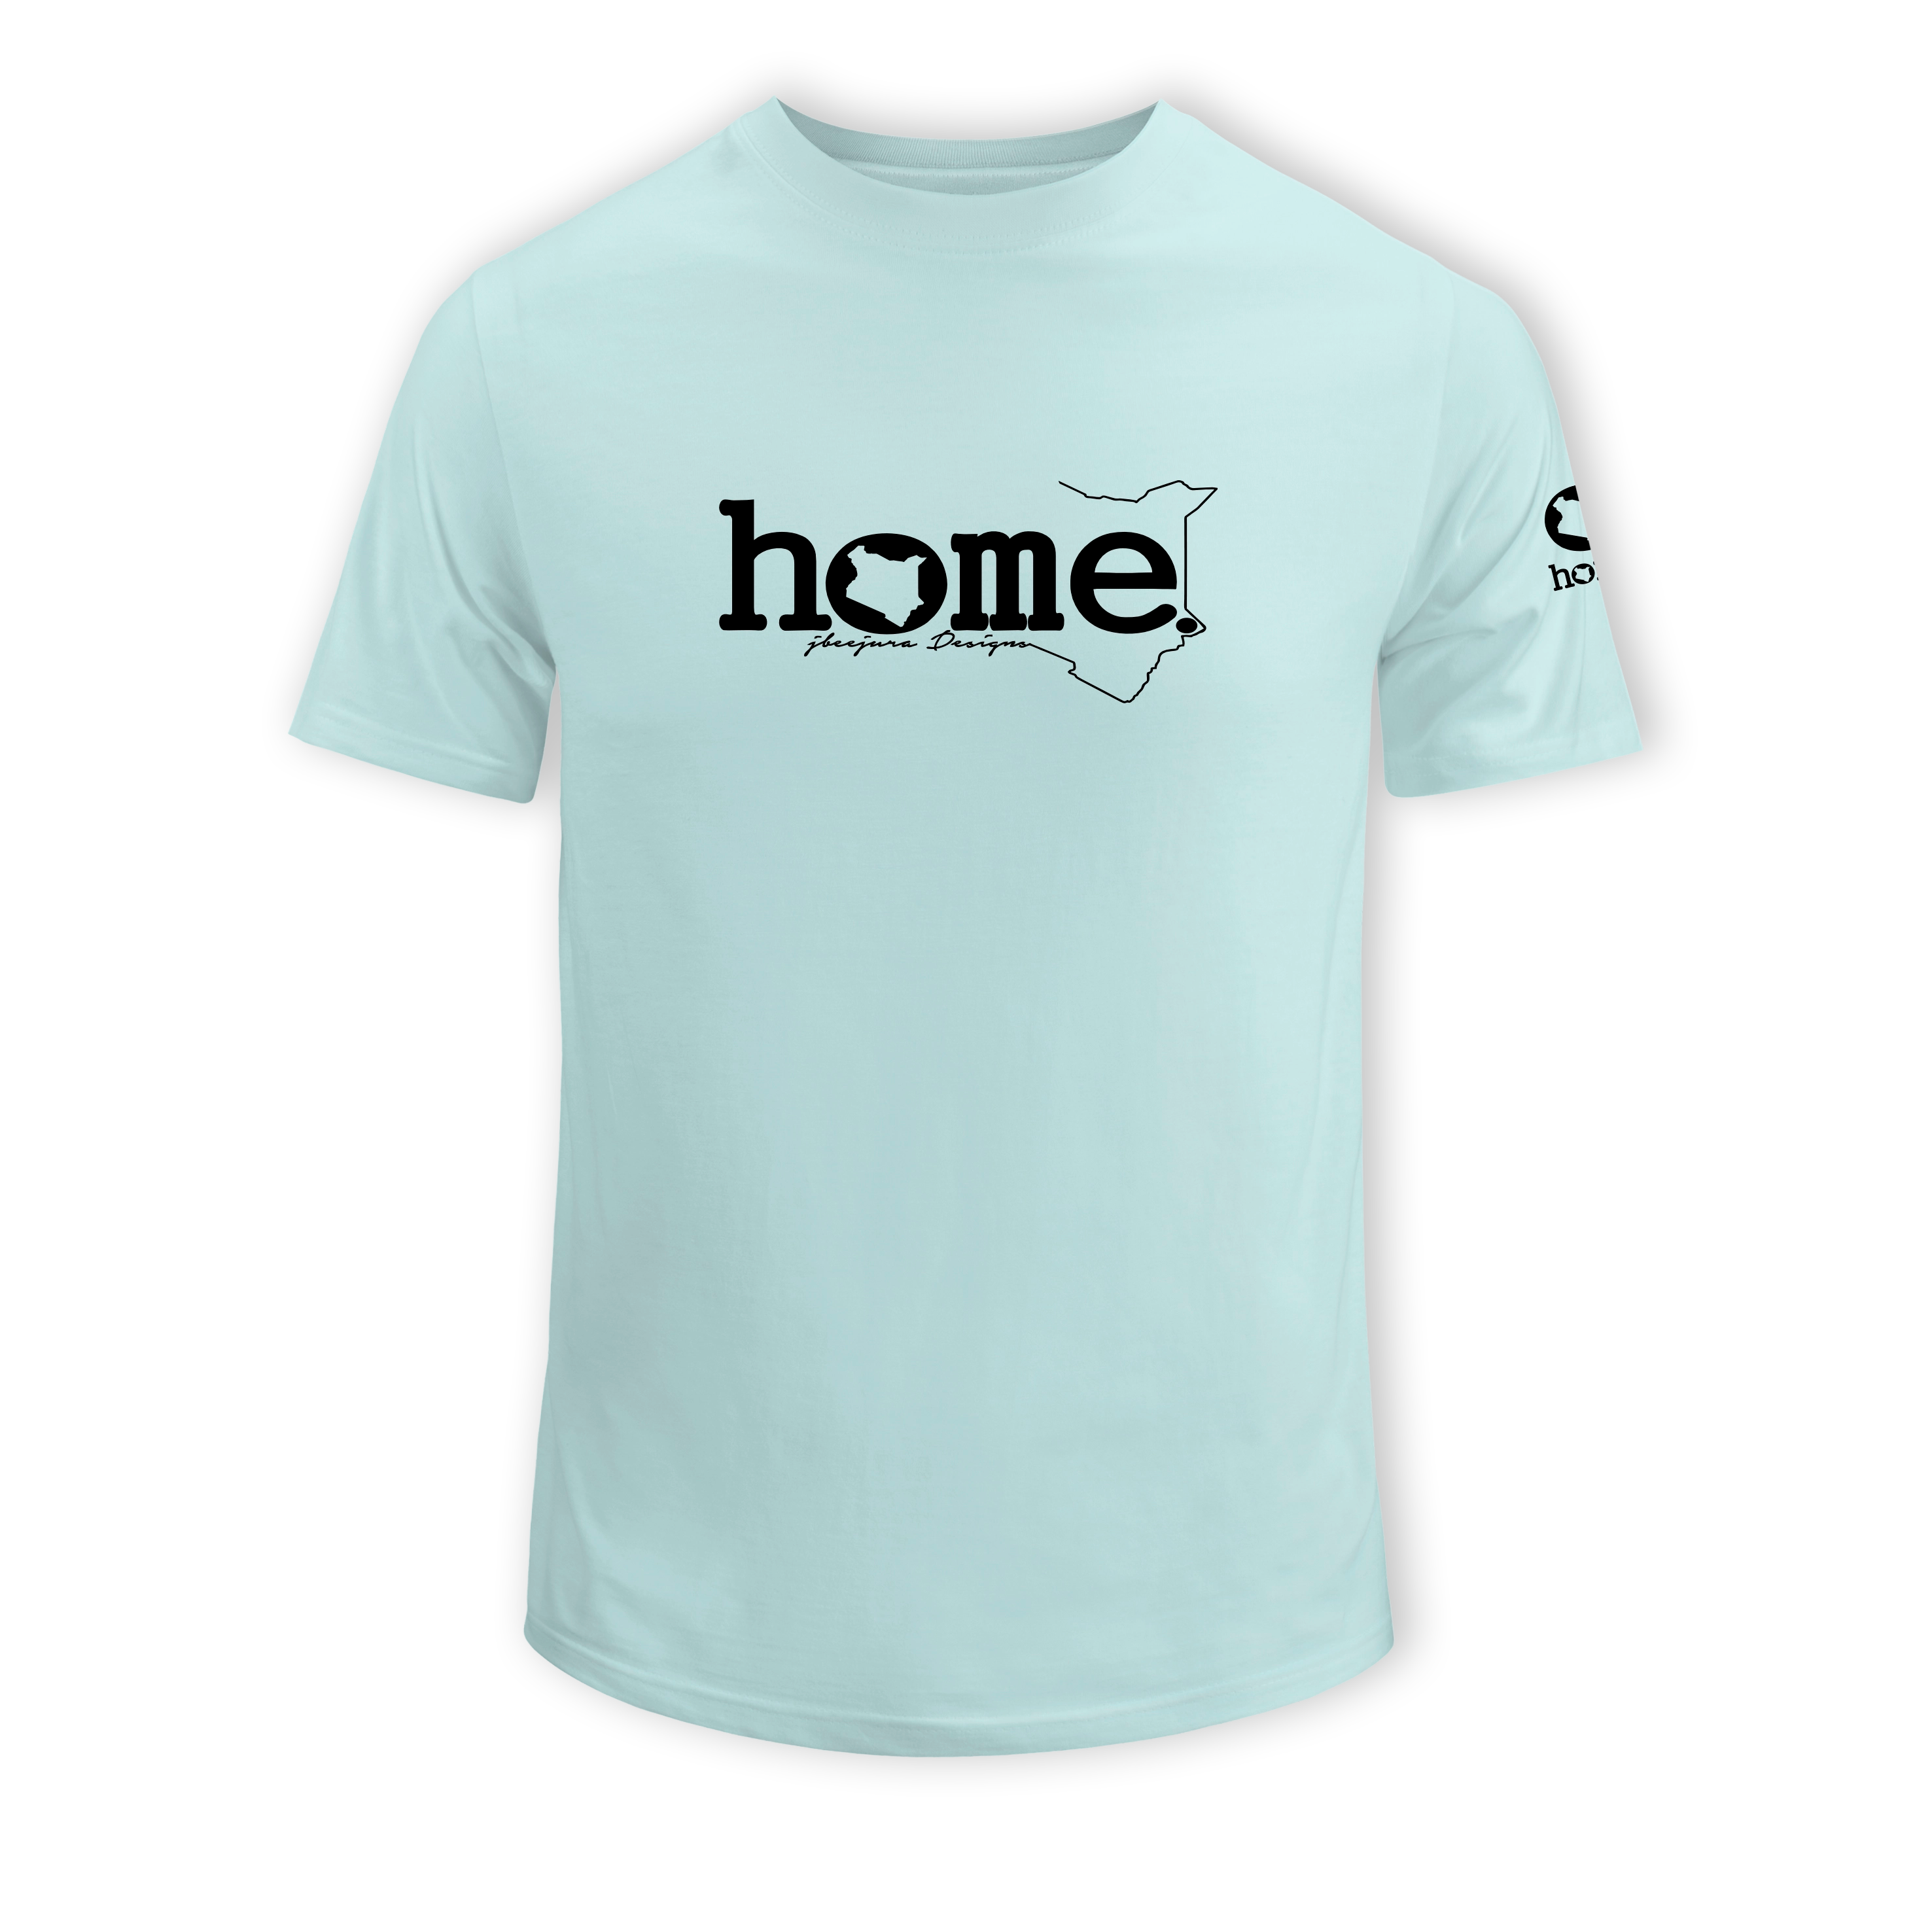 home_254 SHORT-SLEEVED MISTY BLUE T-SHIRT WITH A BLACK CLASSIC WORDS  PRINT – COTTON PLUS FABRIC